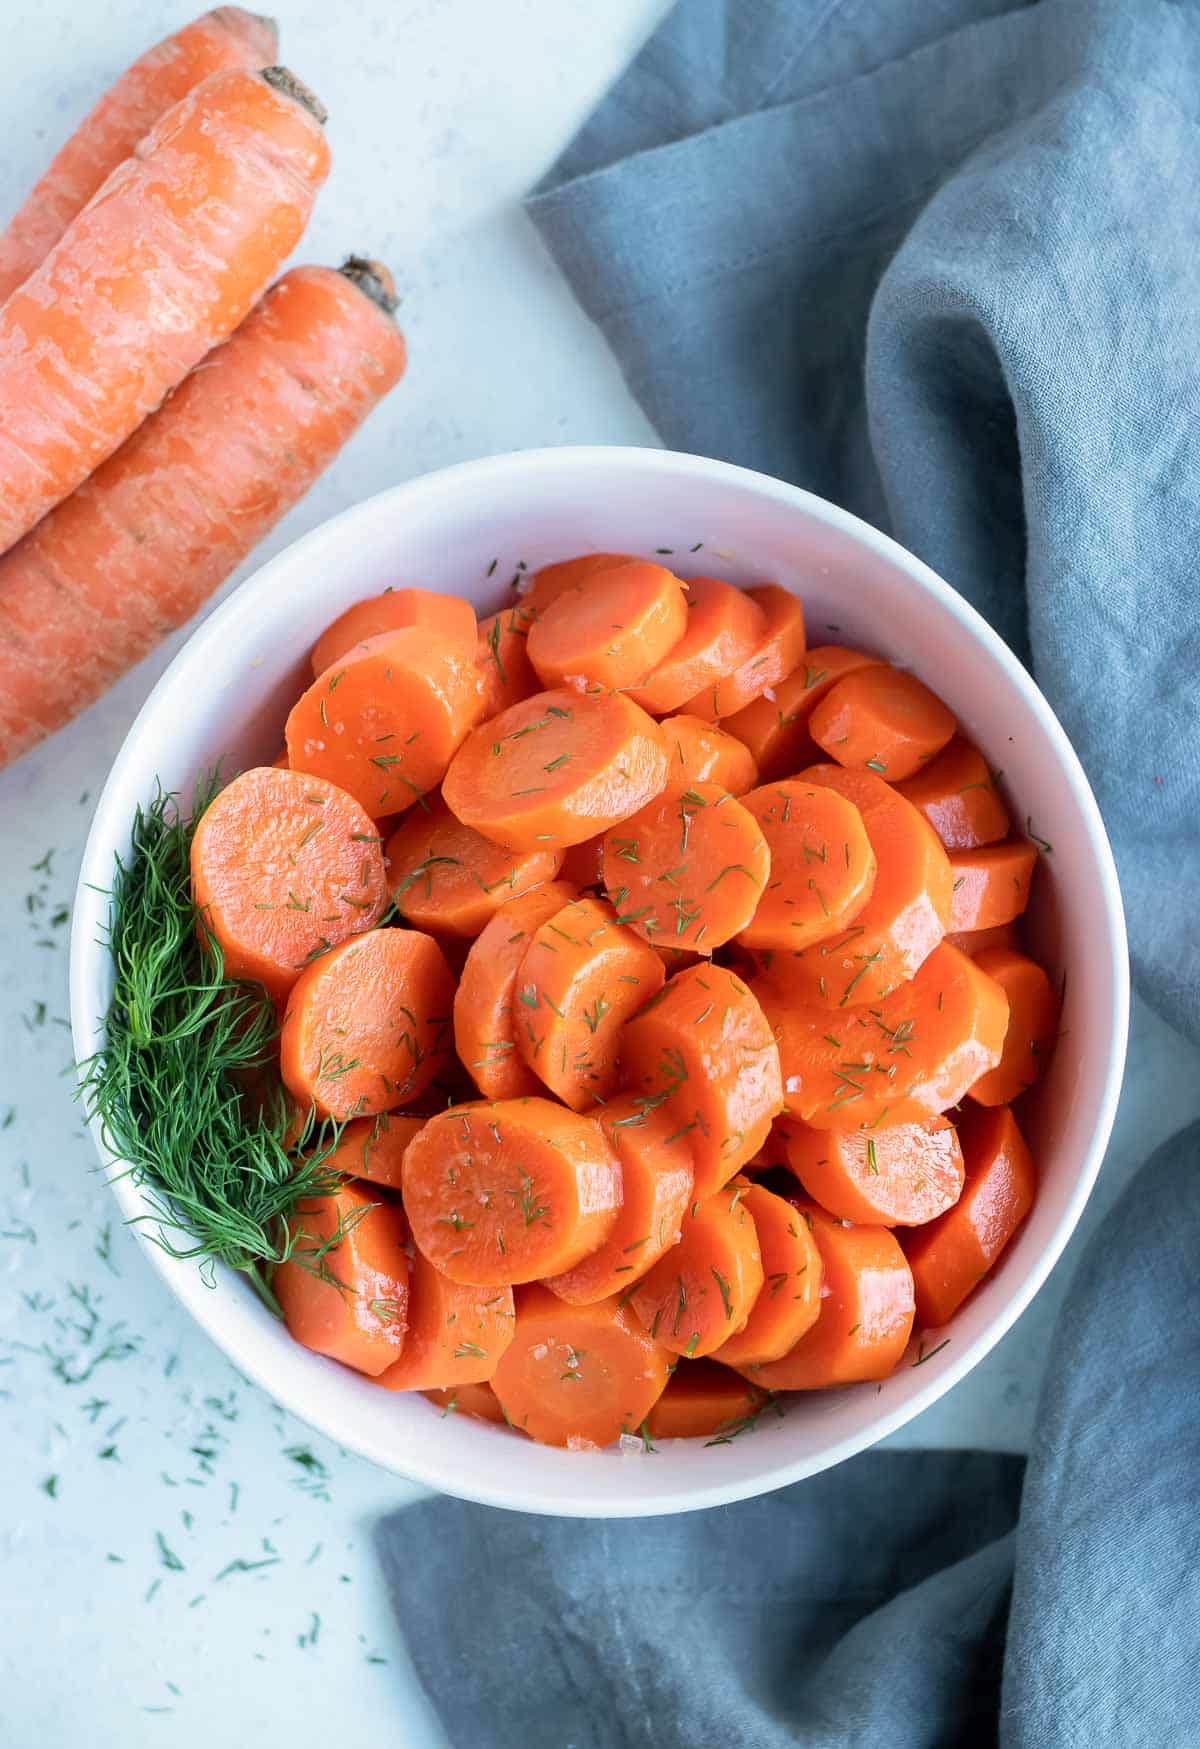 Boiled carrots are served in a bowl for a side.